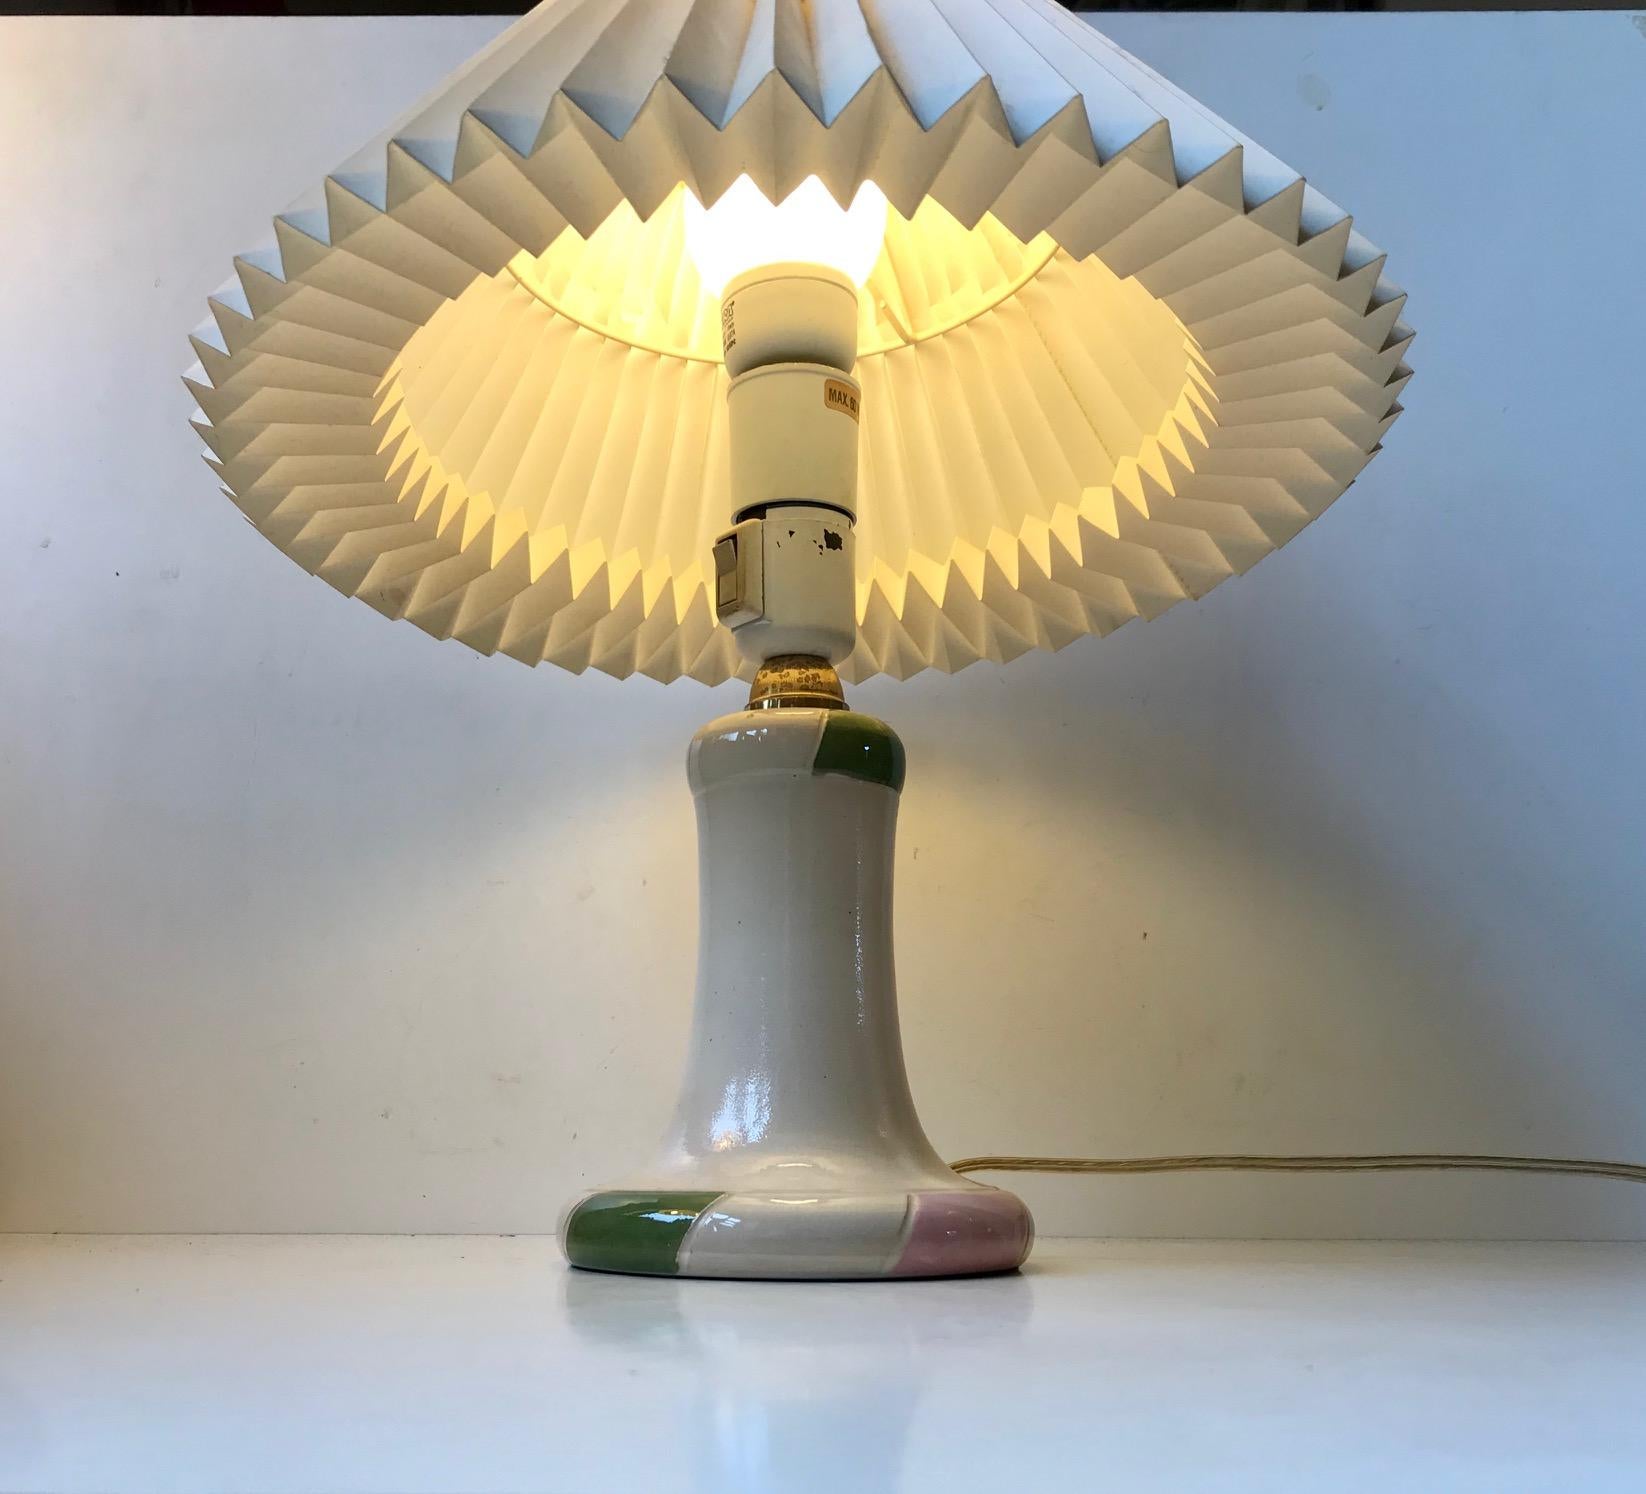 Gourd shaped Art Deco revival table lamp from Danish Studio ceramic workshop Dågård. Created during the 1970s in a style that mimics Art Deco. This light features on/off switch to the socket/top. Notice that the shade is not included. Please